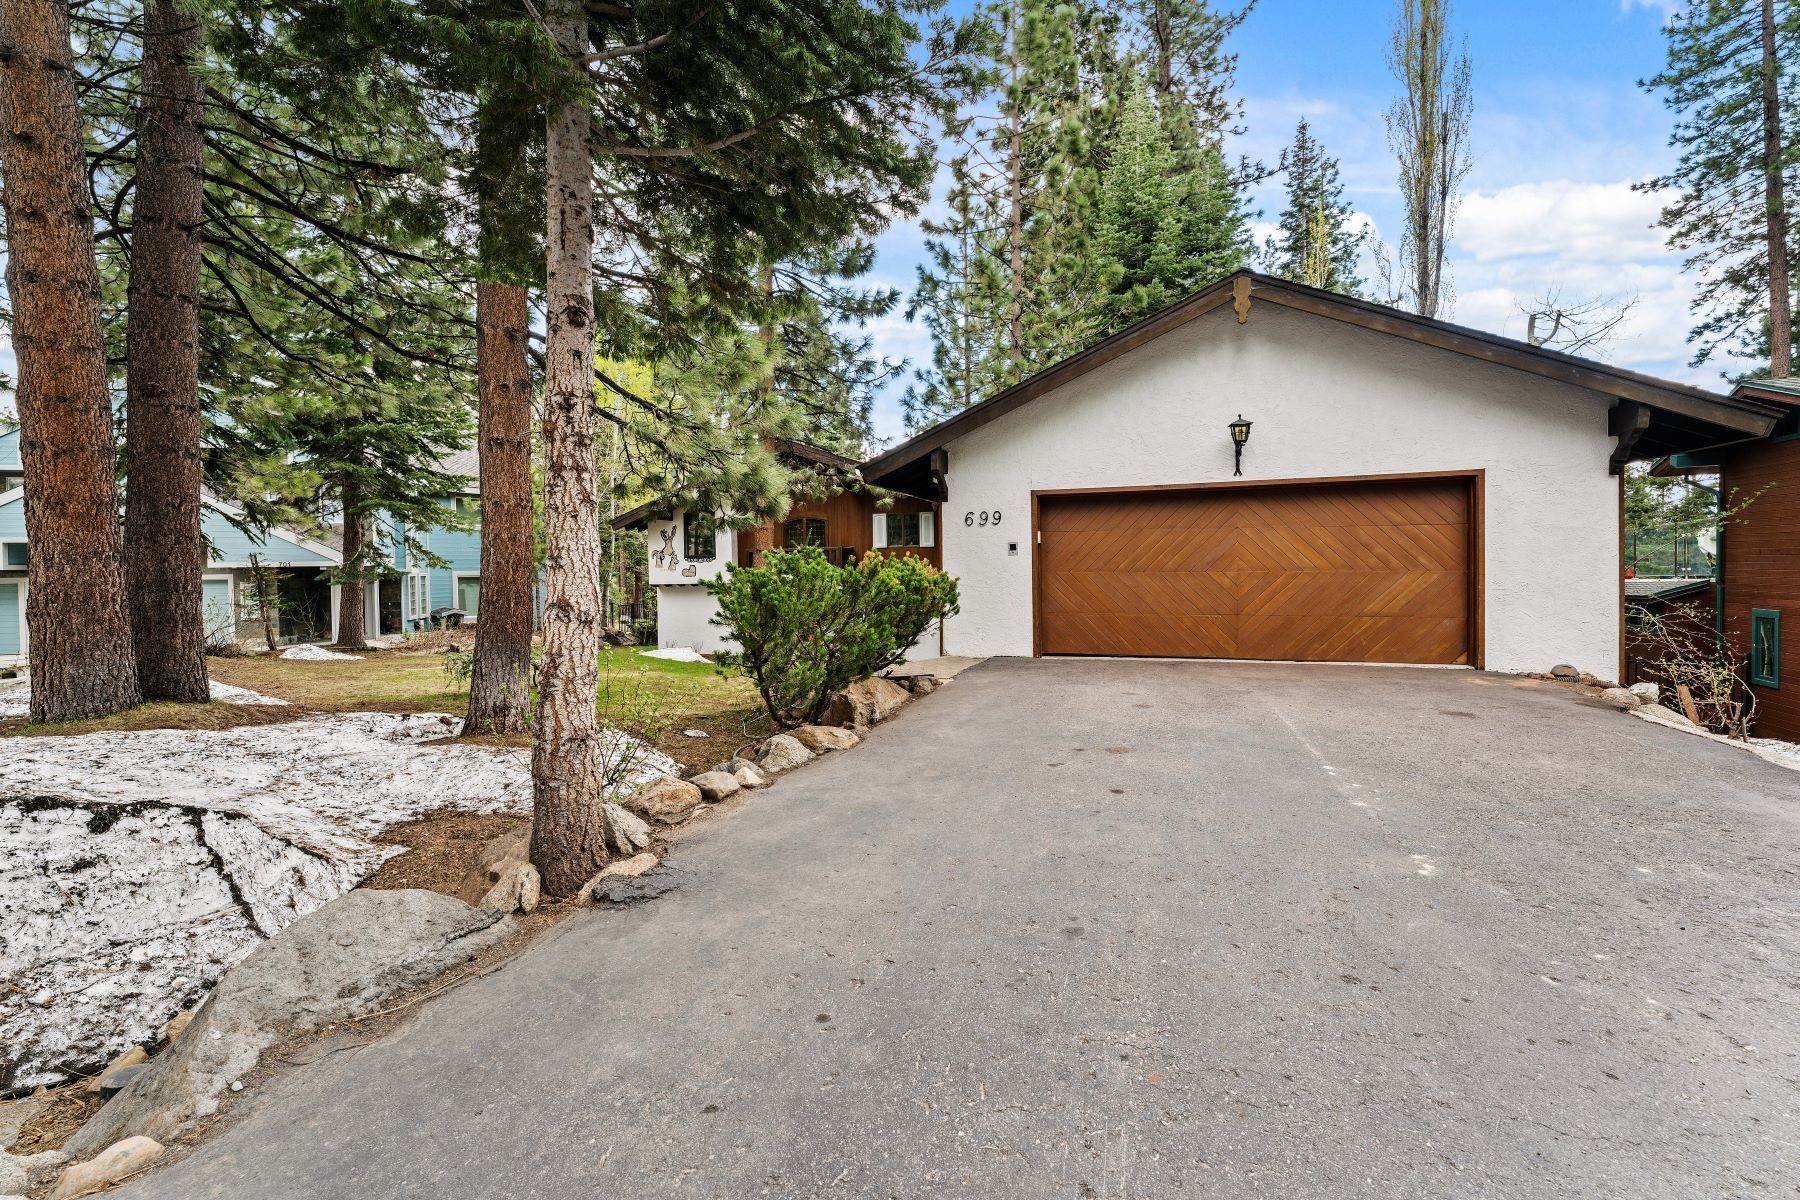 3. Single Family Homes for Active at Mountain Bavarian Chalet 699 Birdie Way Incline Village, Nevada 89451 United States